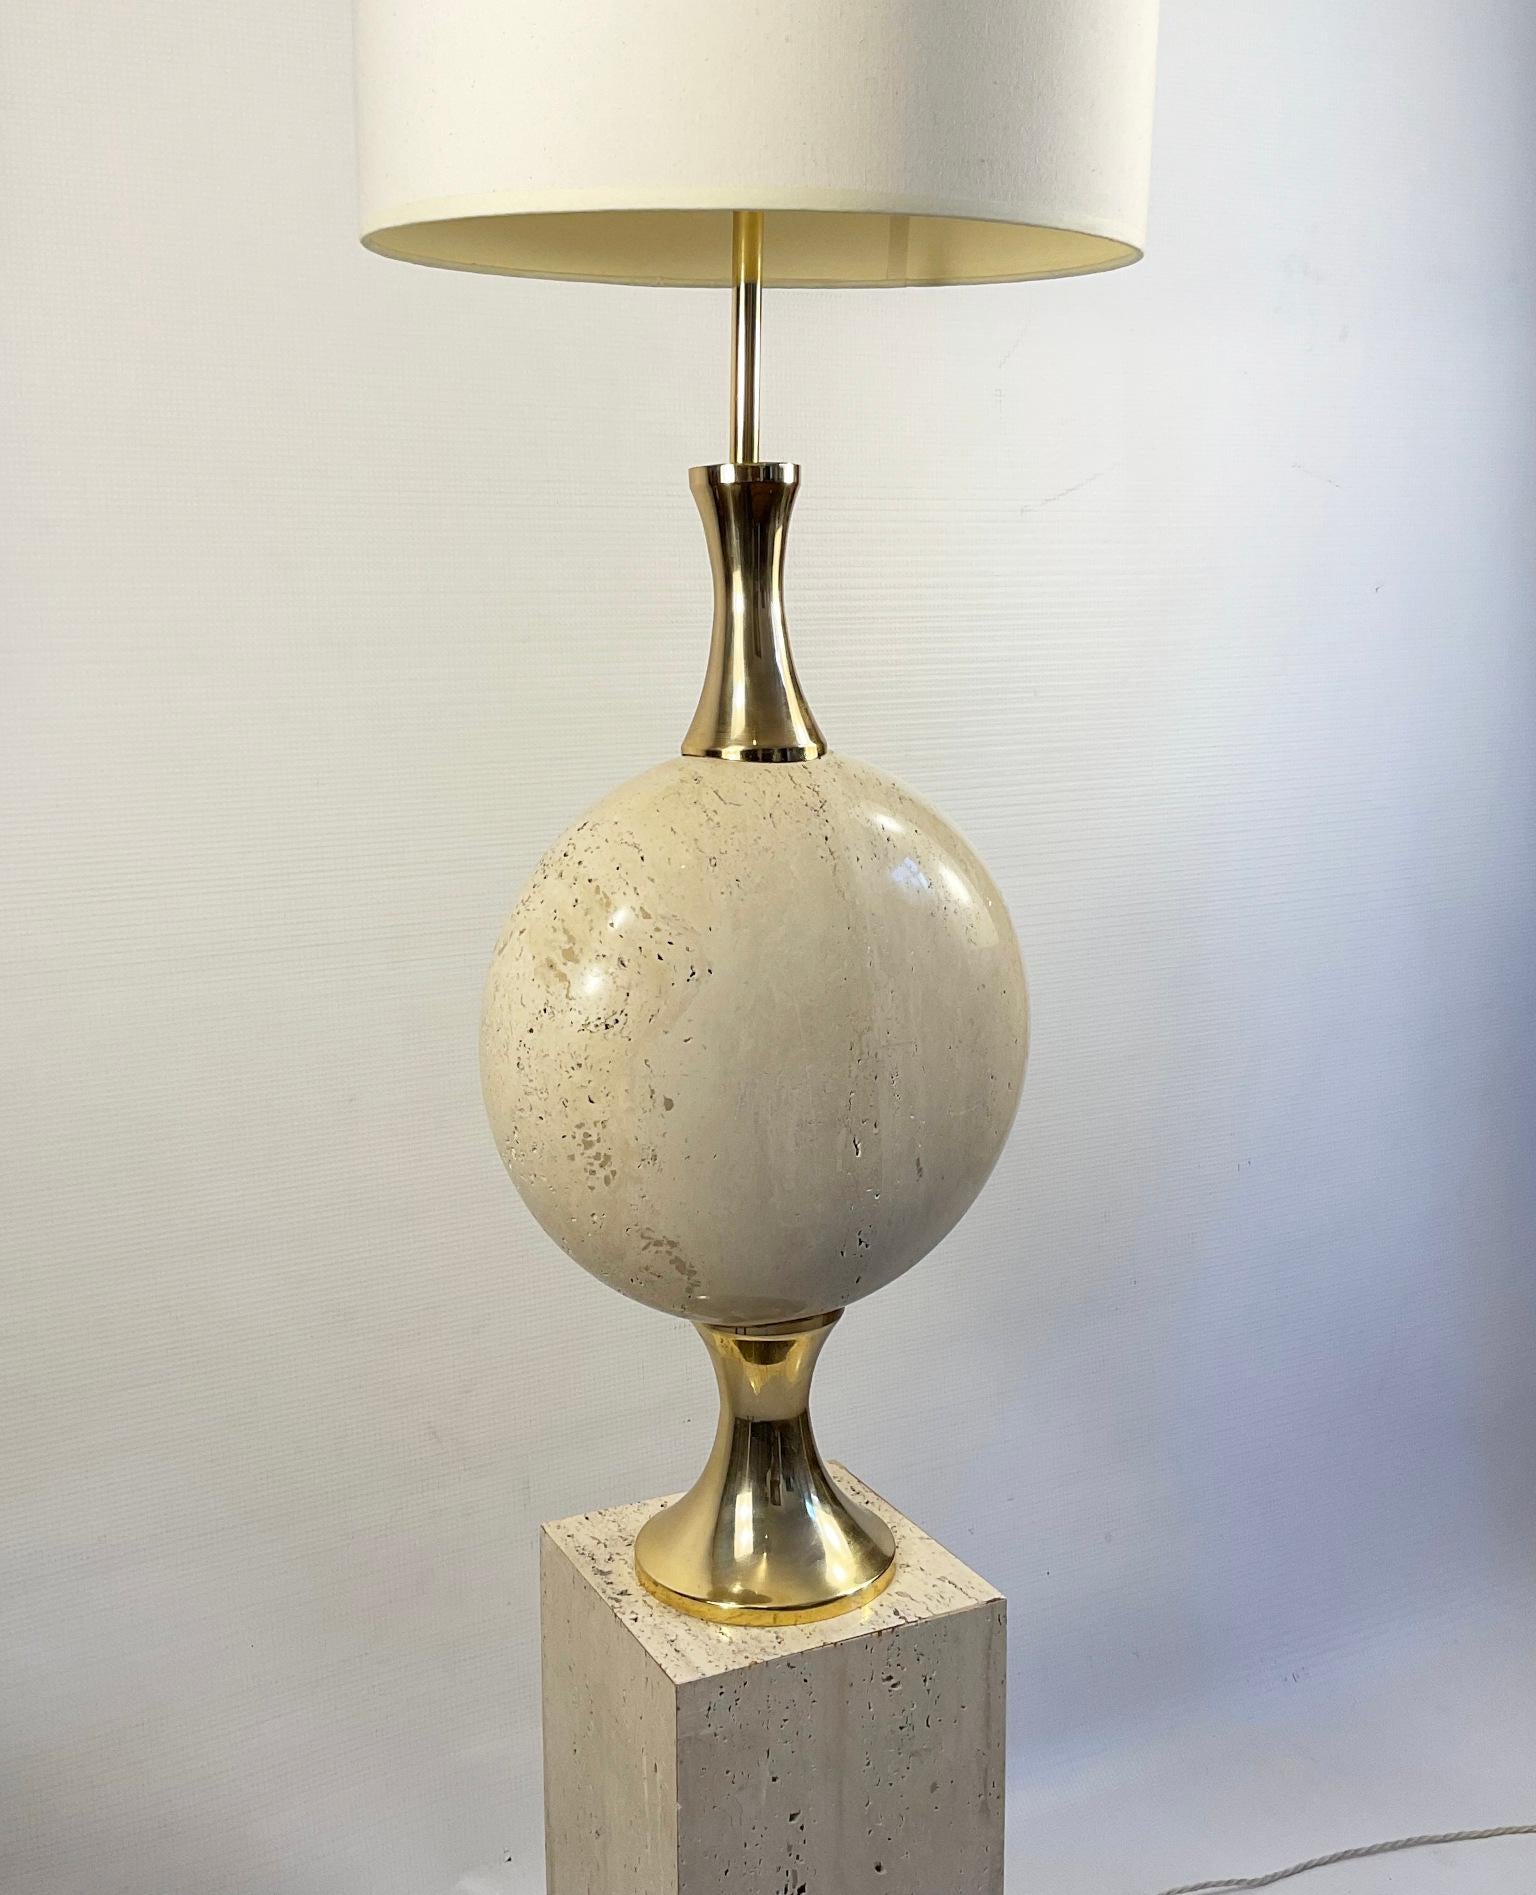 1970s Travertine Floor Lamp by Philippe Barbier for Maison Barbier Paris France In Fair Condition For Sale In London, GB